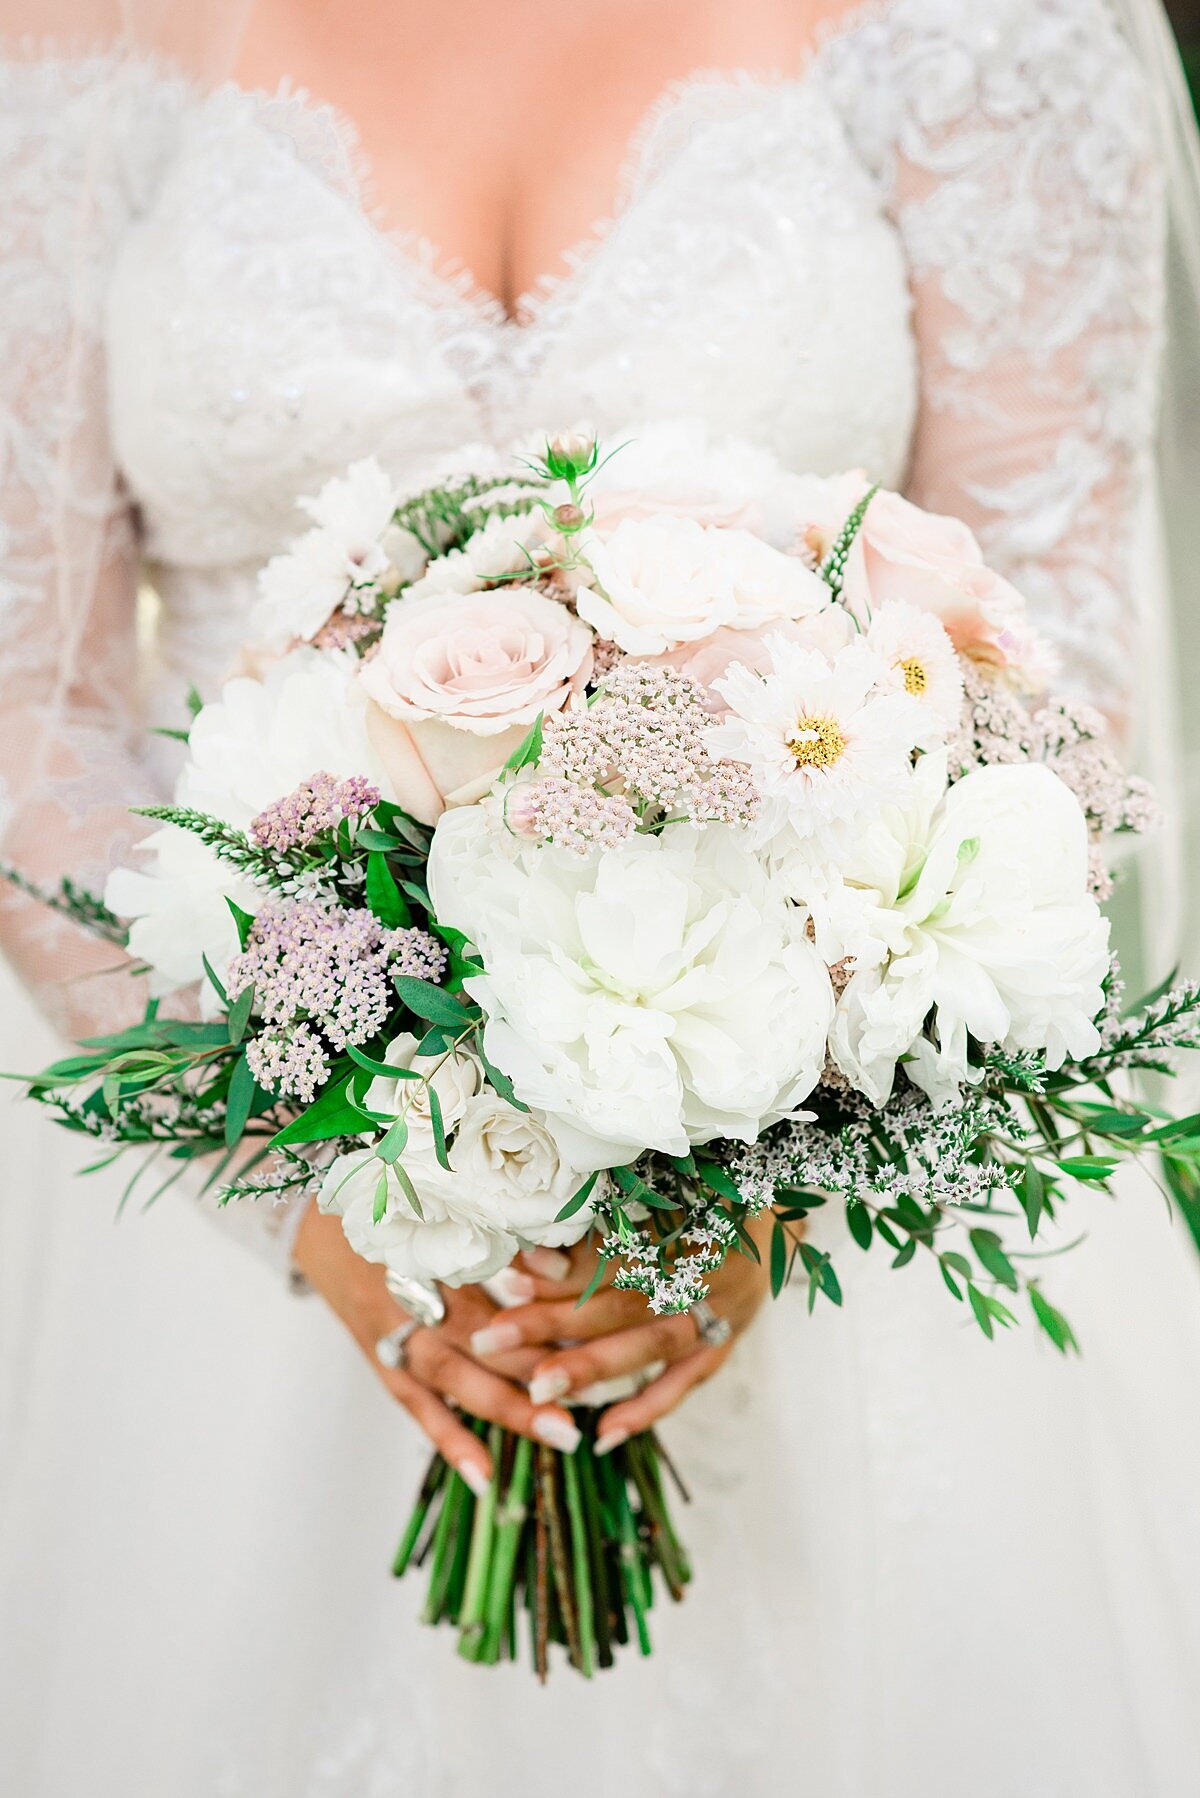 A bride ina. v neck, long sleeved white wedding dress holds a large white bridal bouquet of white peonies, white roses, white dahlias, light pink rice flower and greenery at Steel Magnolia Barn.